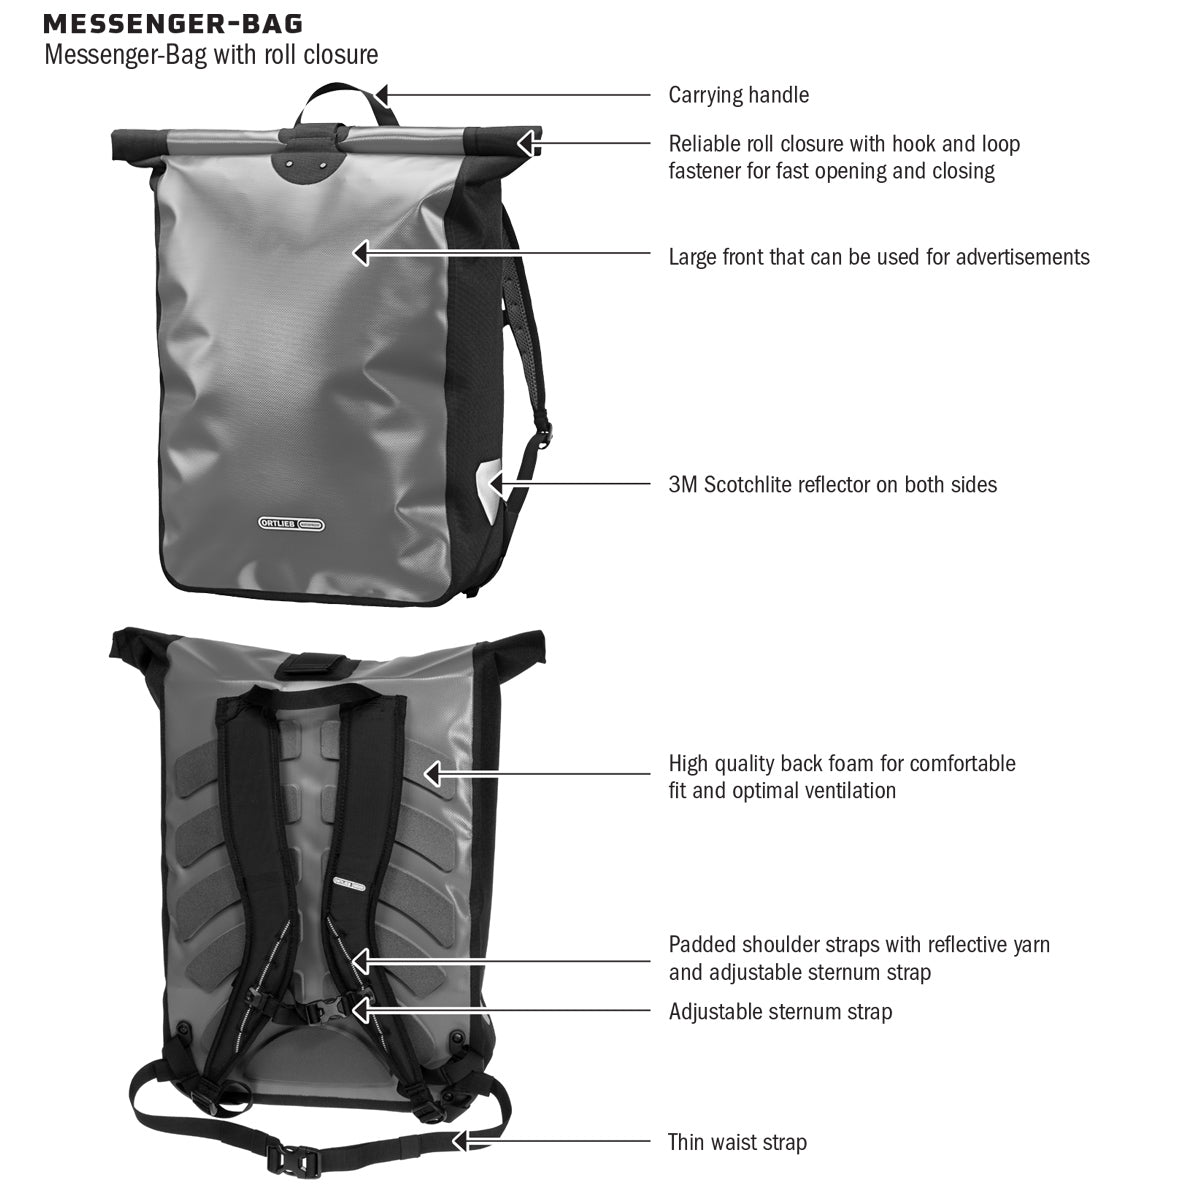 Ortlieb Messenger Bag Features Overview